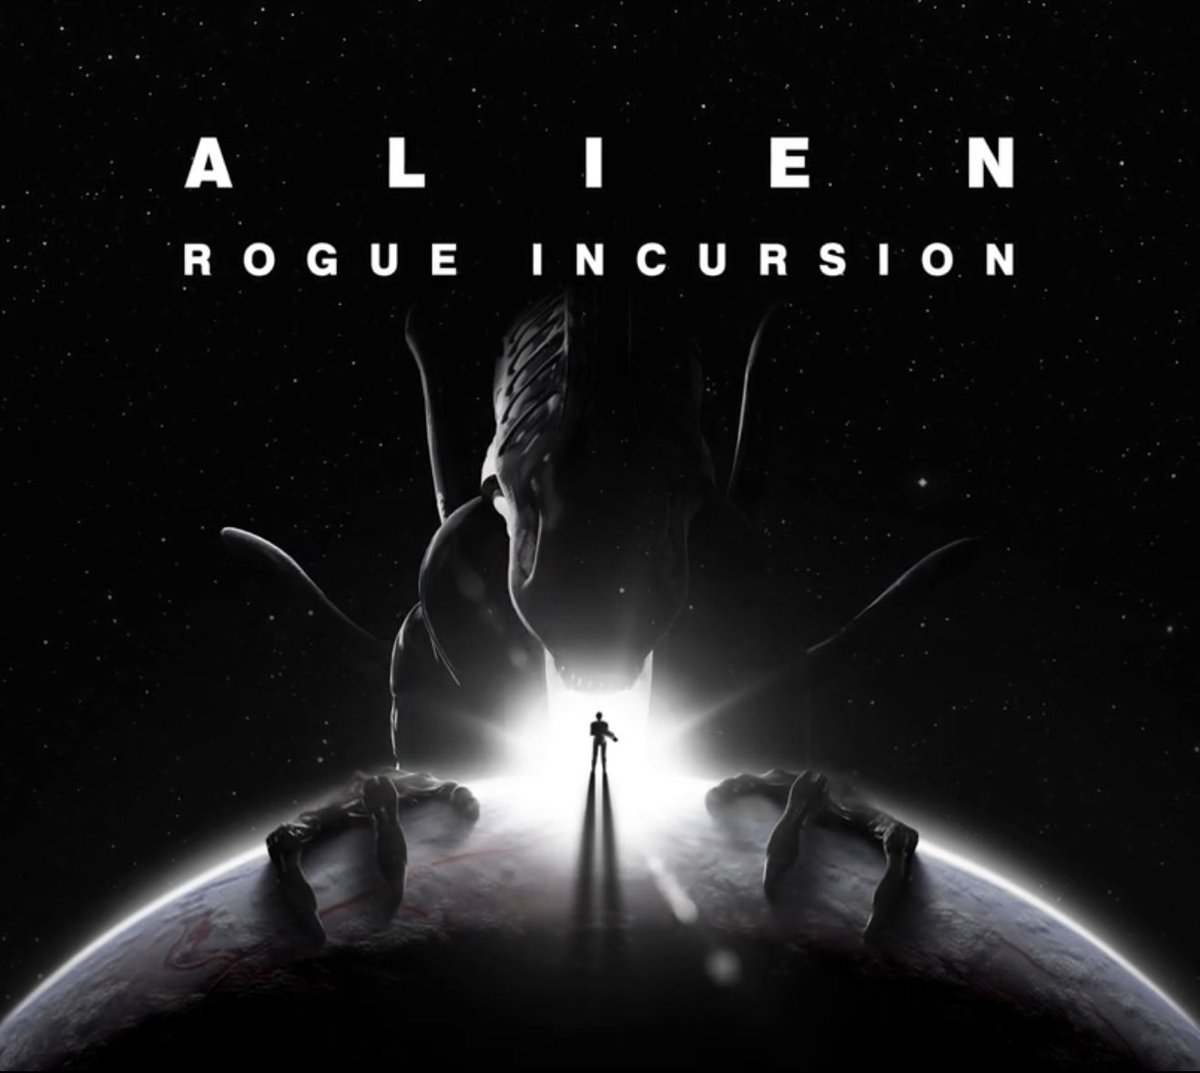 An ‘ALIEN’ VR game will release later this year. Described as single-player & action-horror with an original story.